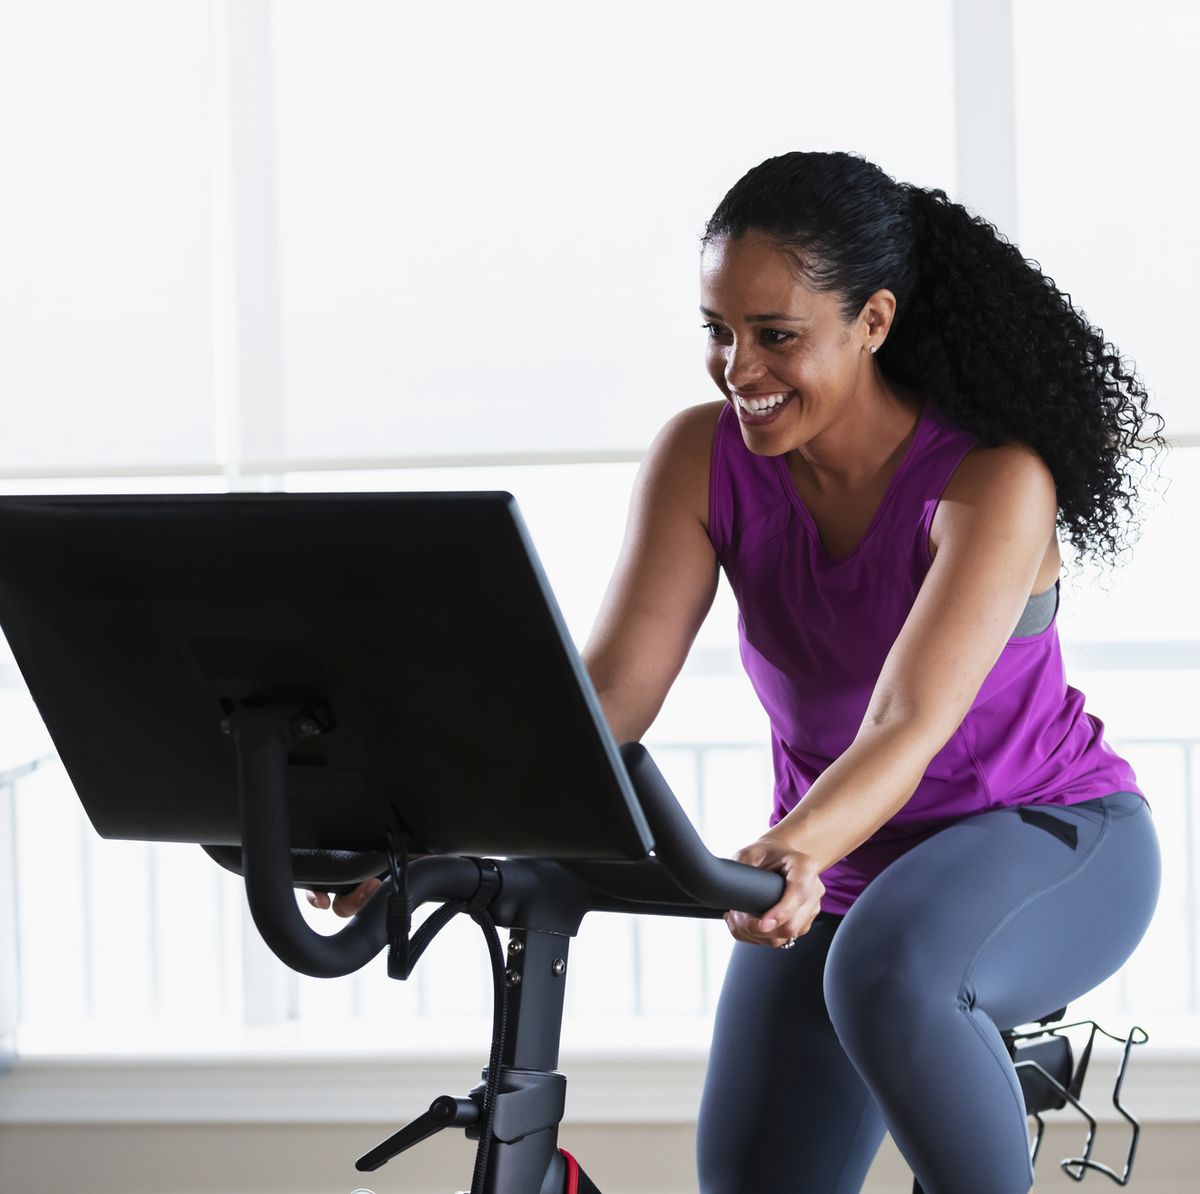 Beginners Chair Cardio Workout For Weight Loss. No Impact Seated